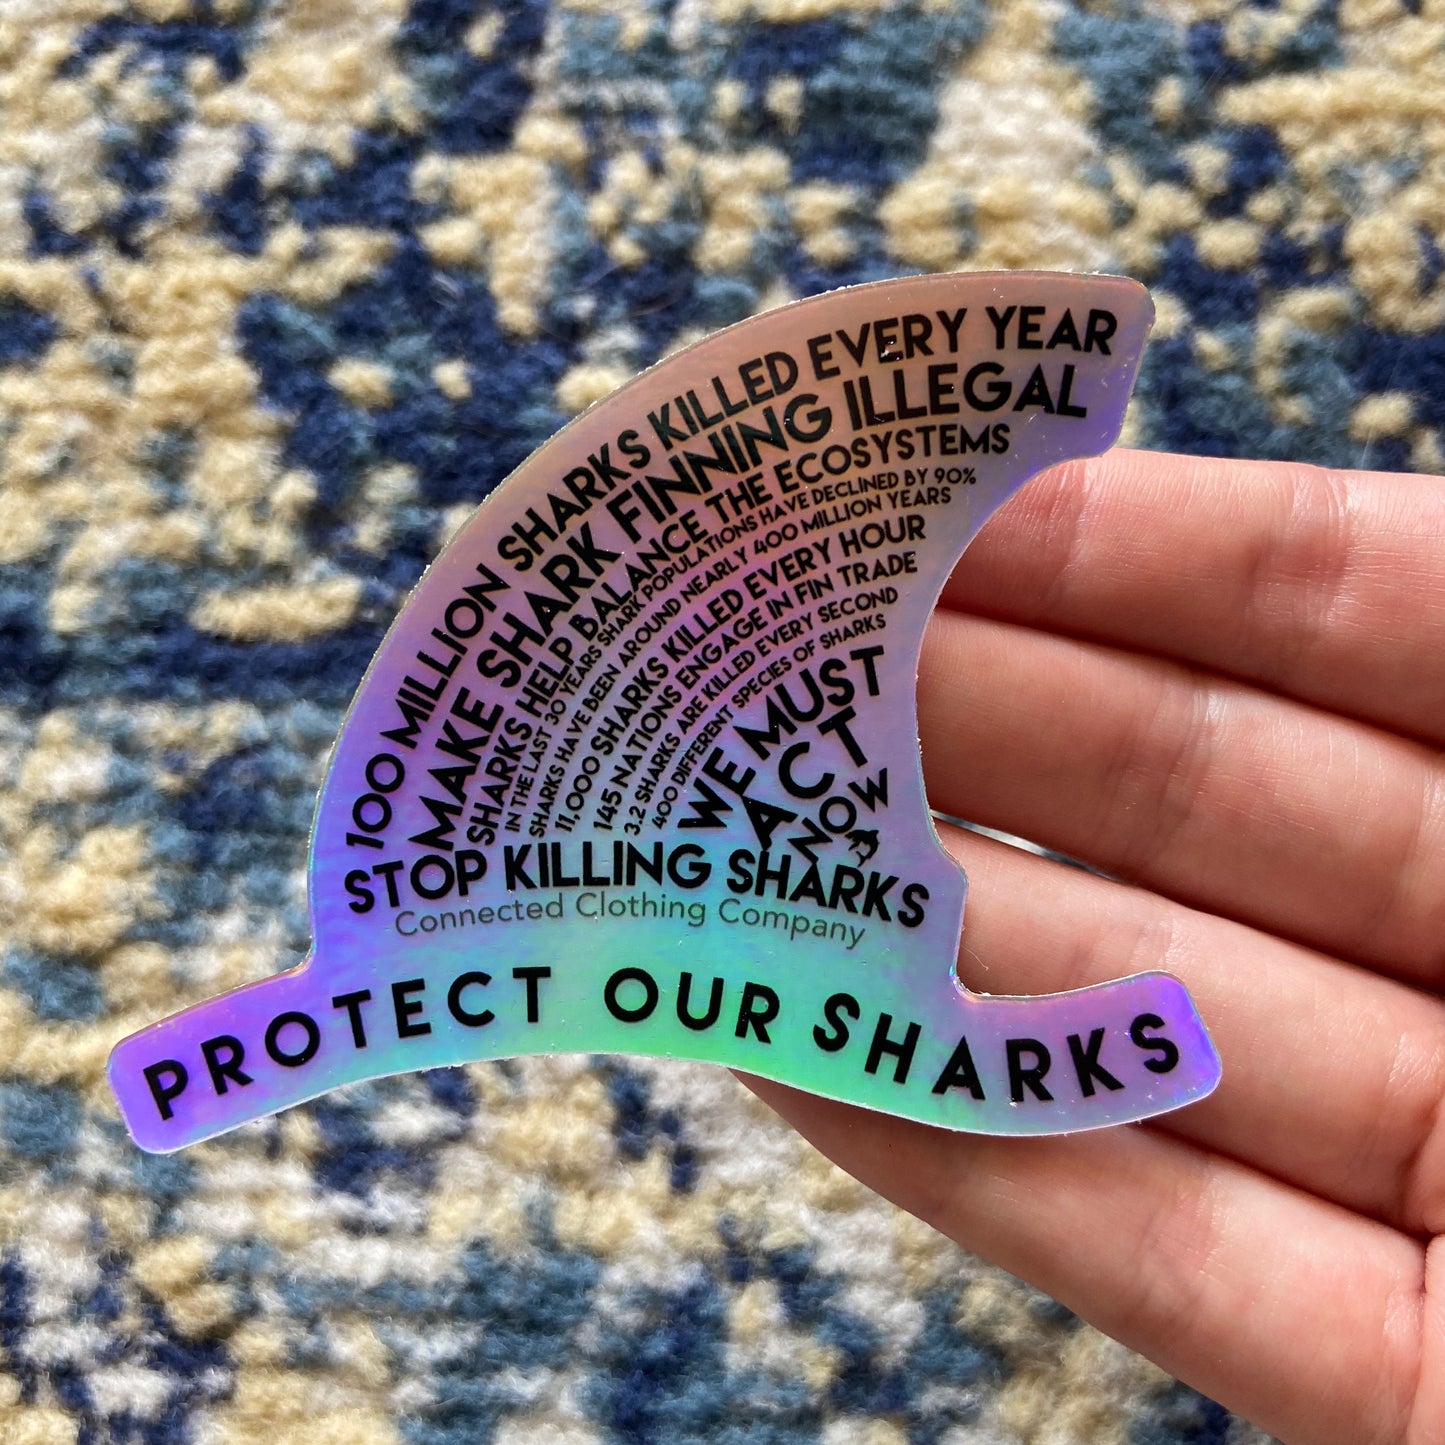 Holographic Protect Our Sharks Sticker - Connected Clothing Company - 10% of profits donated to Oceana shark conservation